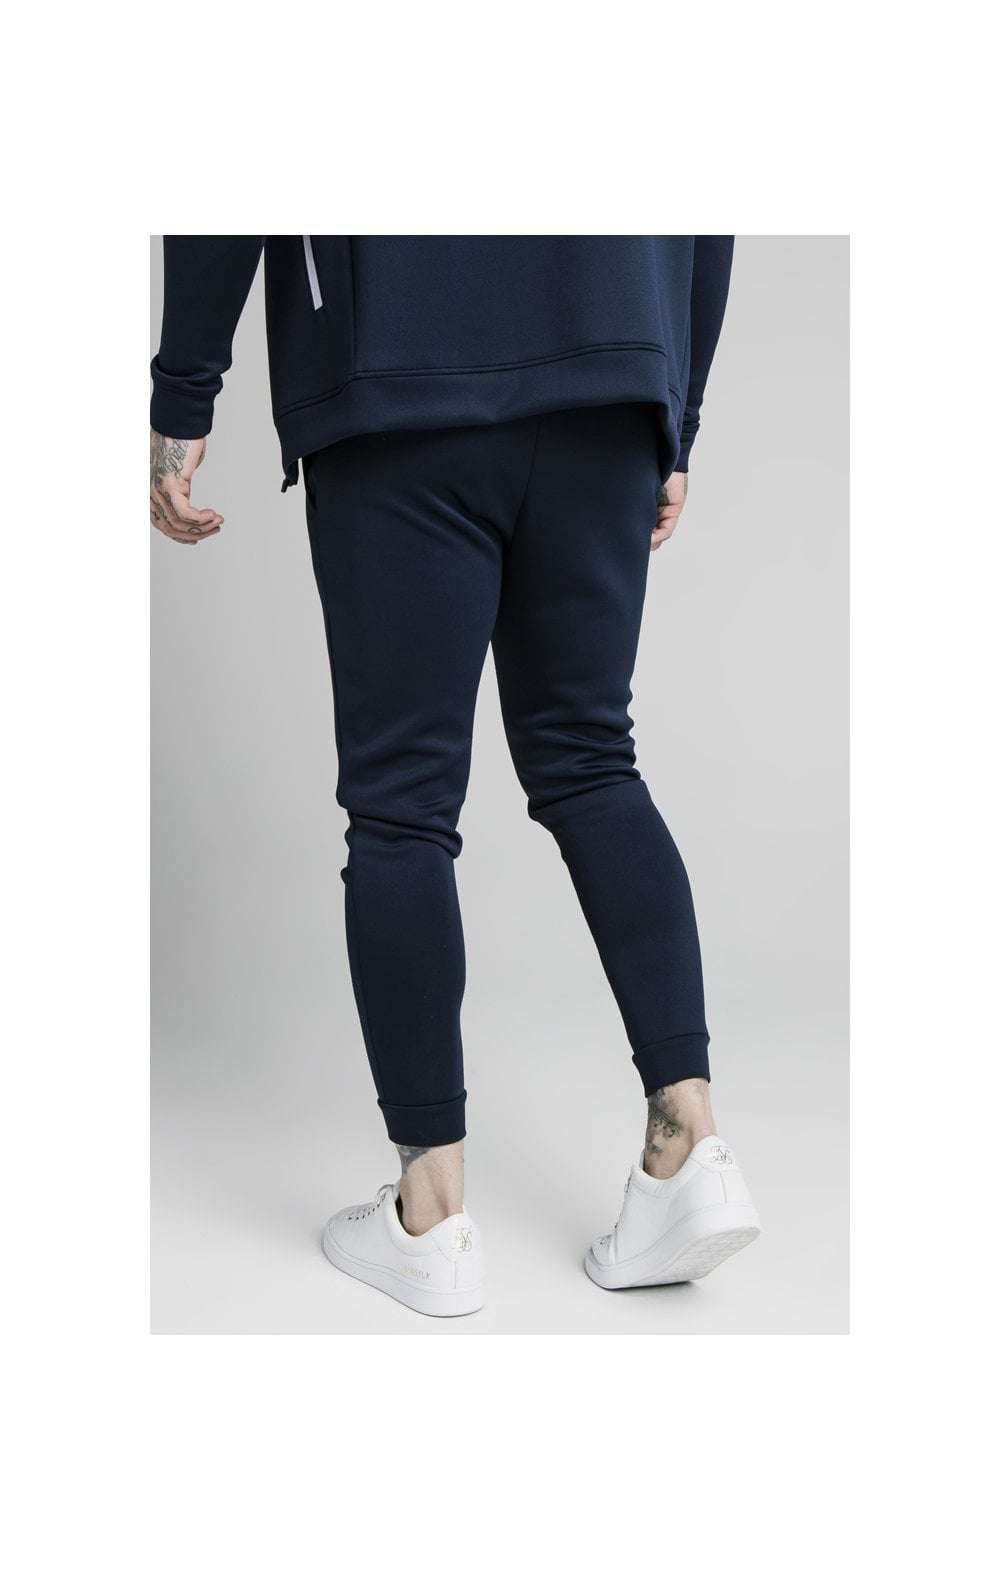 SikSilk Element Muscle Fit Cuff Joggers - Navy &amp; White (1)